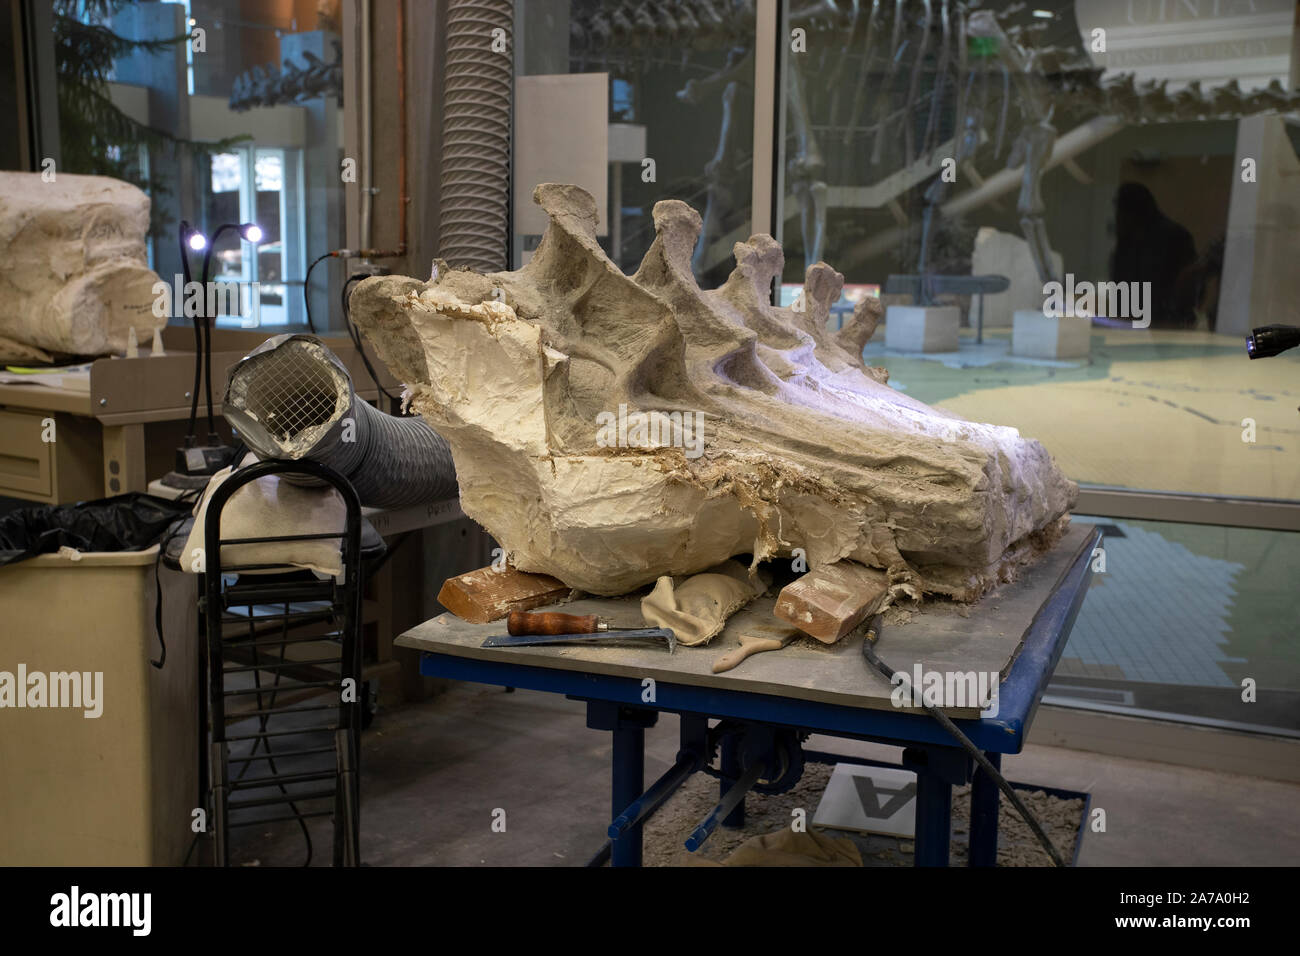 Dinosaur Paleontologist bone fossil working science. Paleontology scientific study of ancient life, fossils, dinosaurs and evolution. Science. Stock Photo